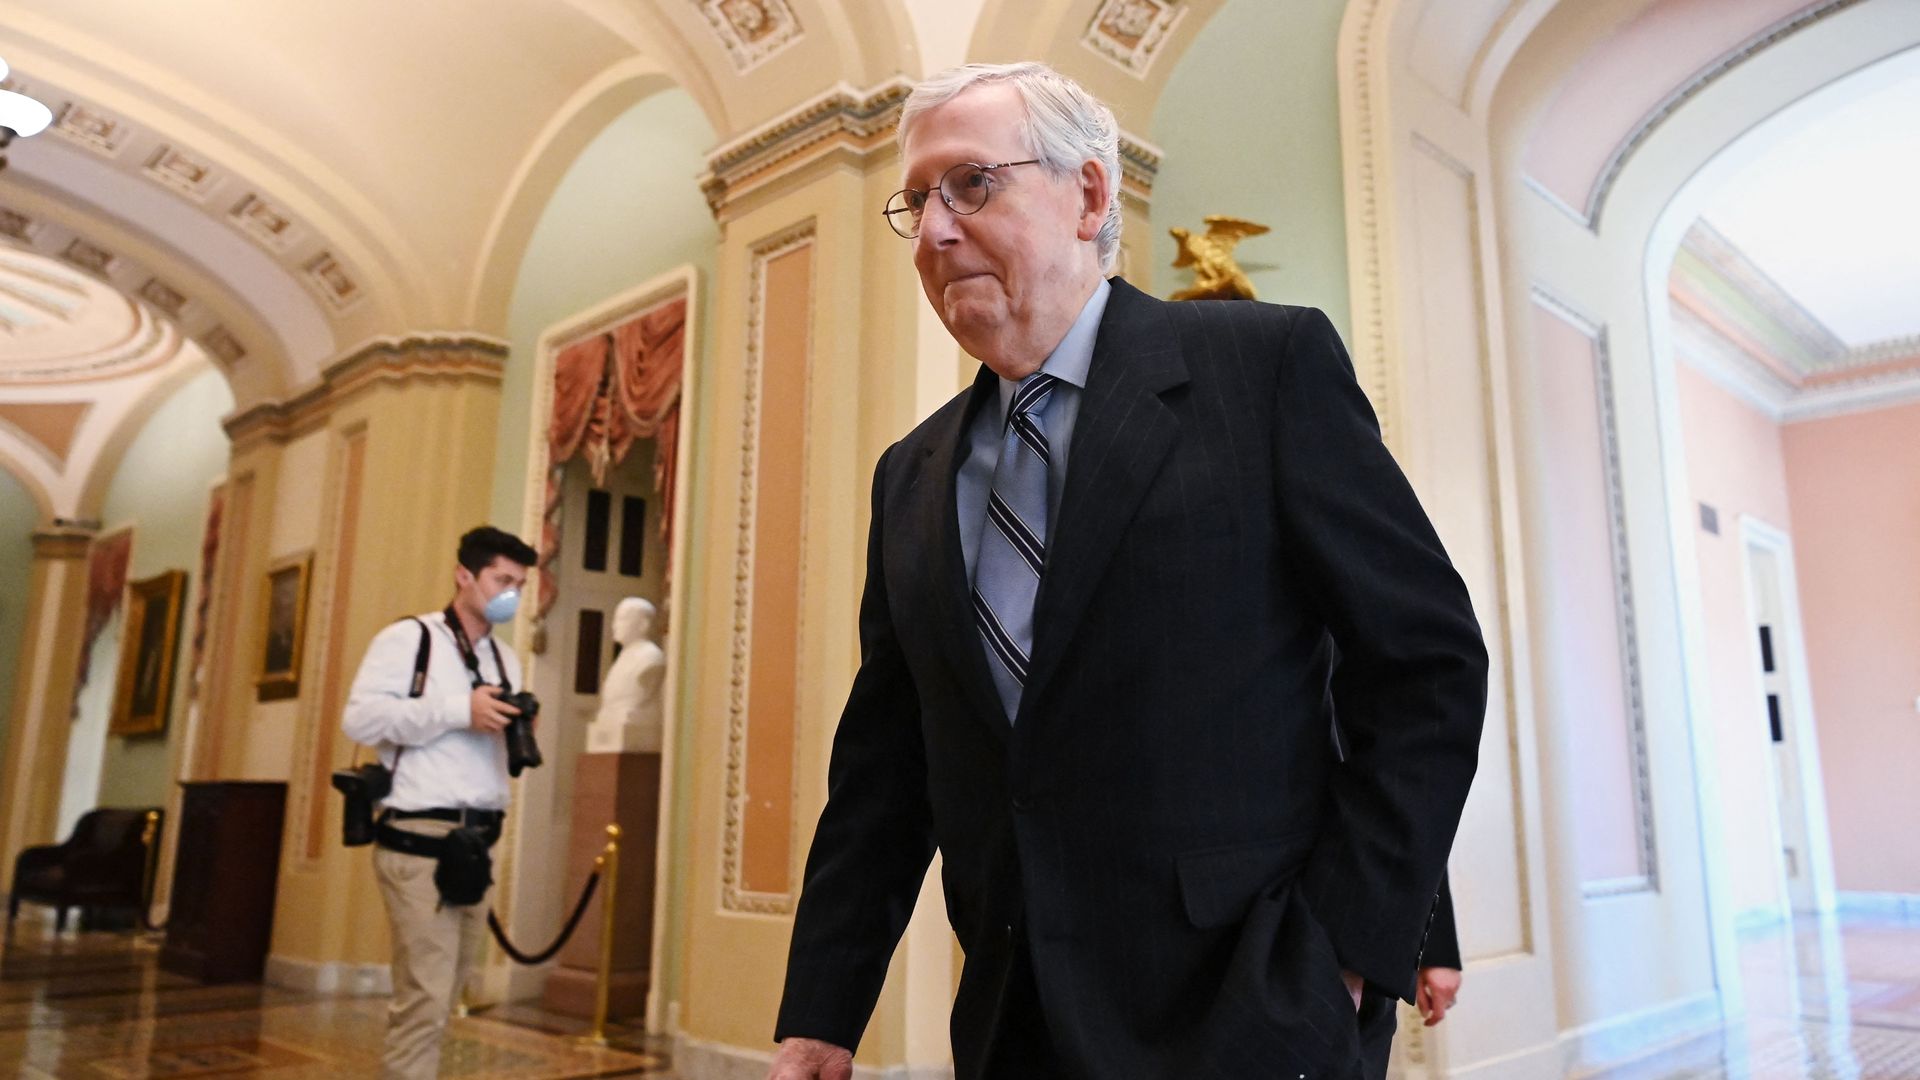  Senate Minority Leader Mitch McConnell, Republican of Kentucky, makes his way to the Senate chamber during the Senate vote-a-rama